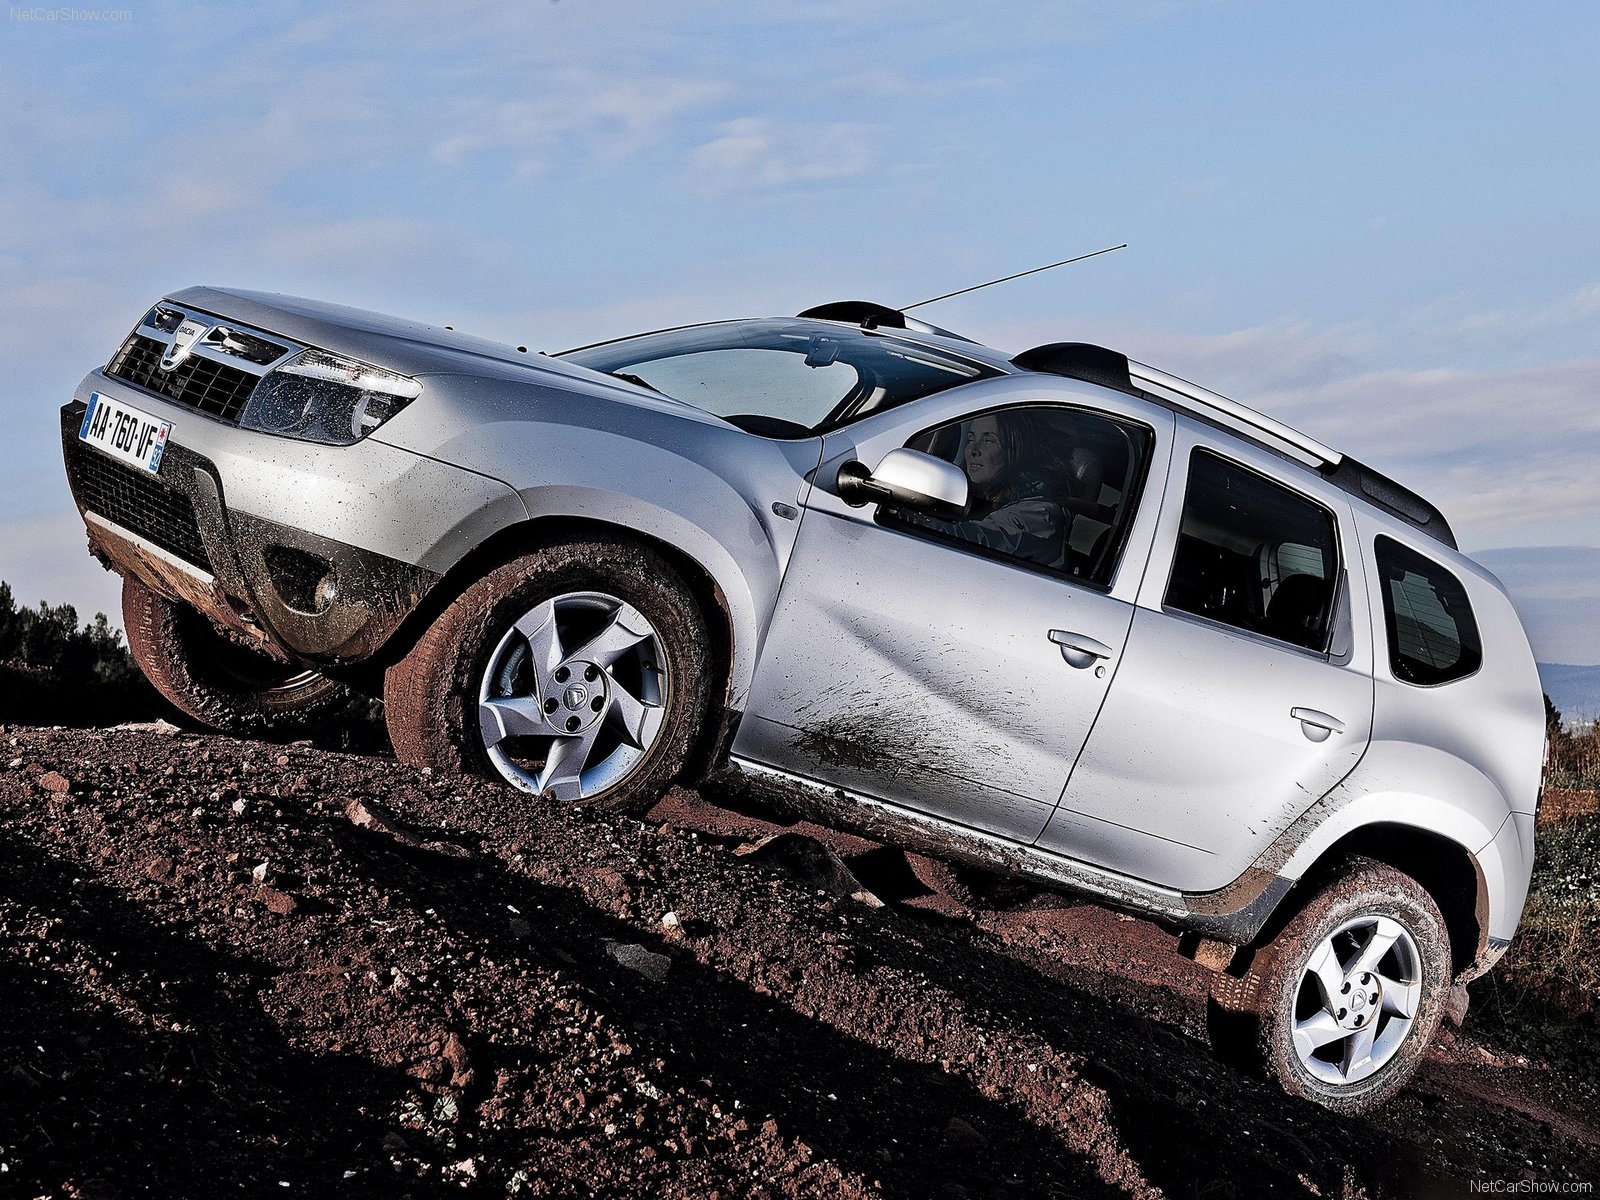 Download Dacia Duster photo #73736) You can use this pic as wallpaper (post...